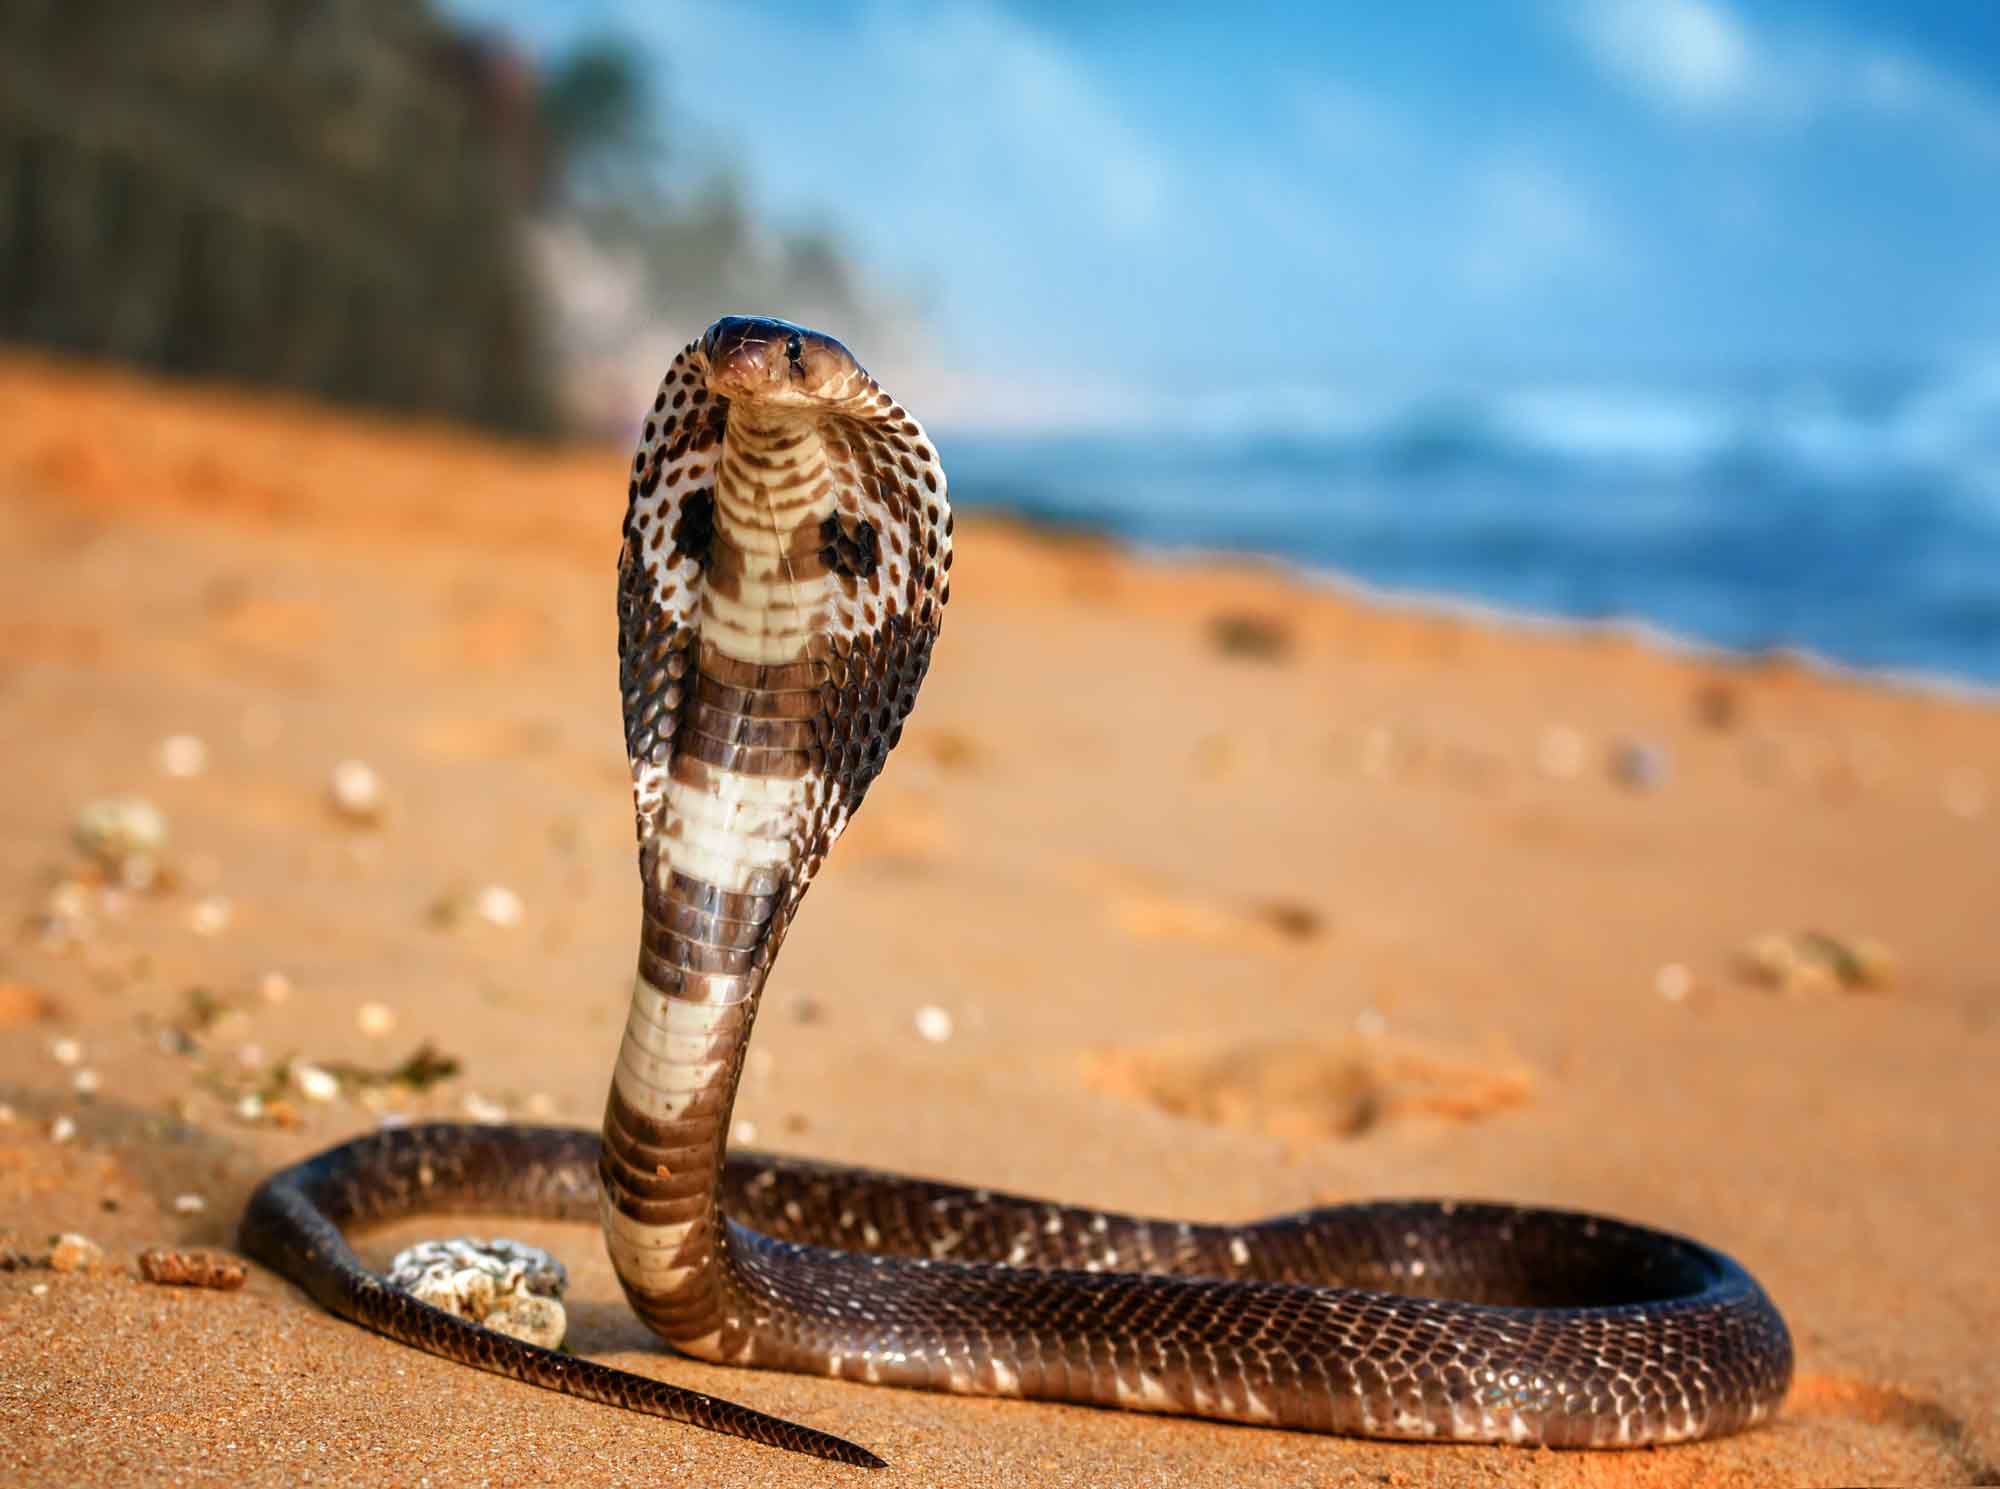 How Fast Can a King Cobra Move?